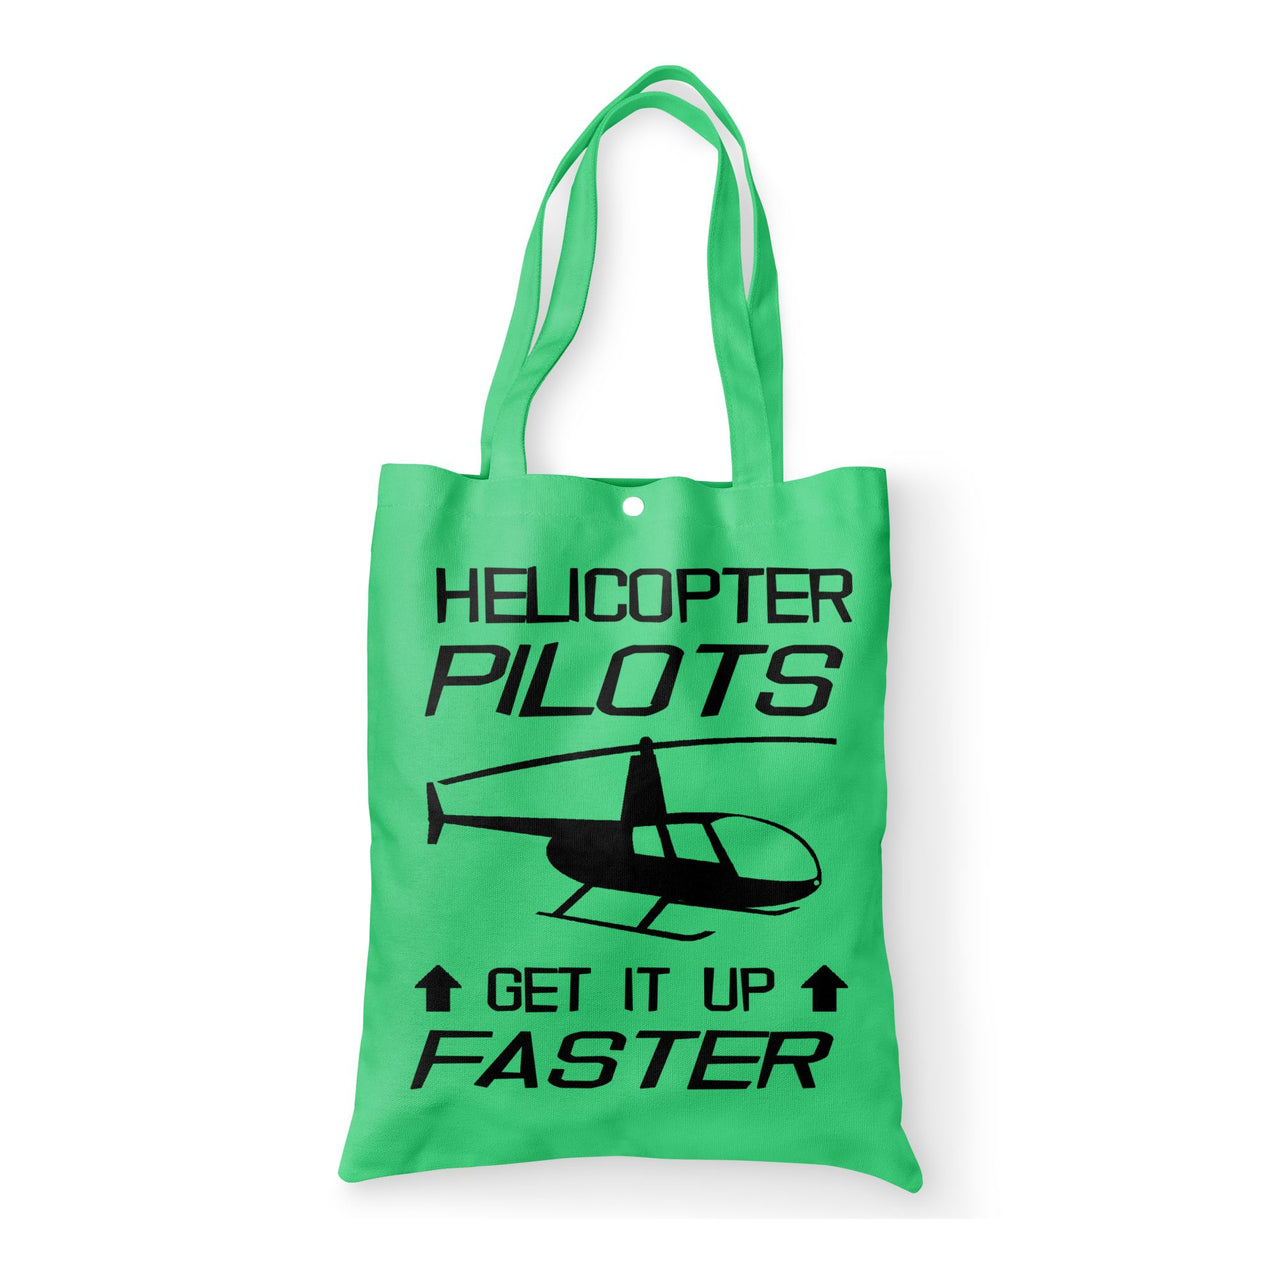 Helicopter Pilots Get It Up Faster Designed Tote Bags